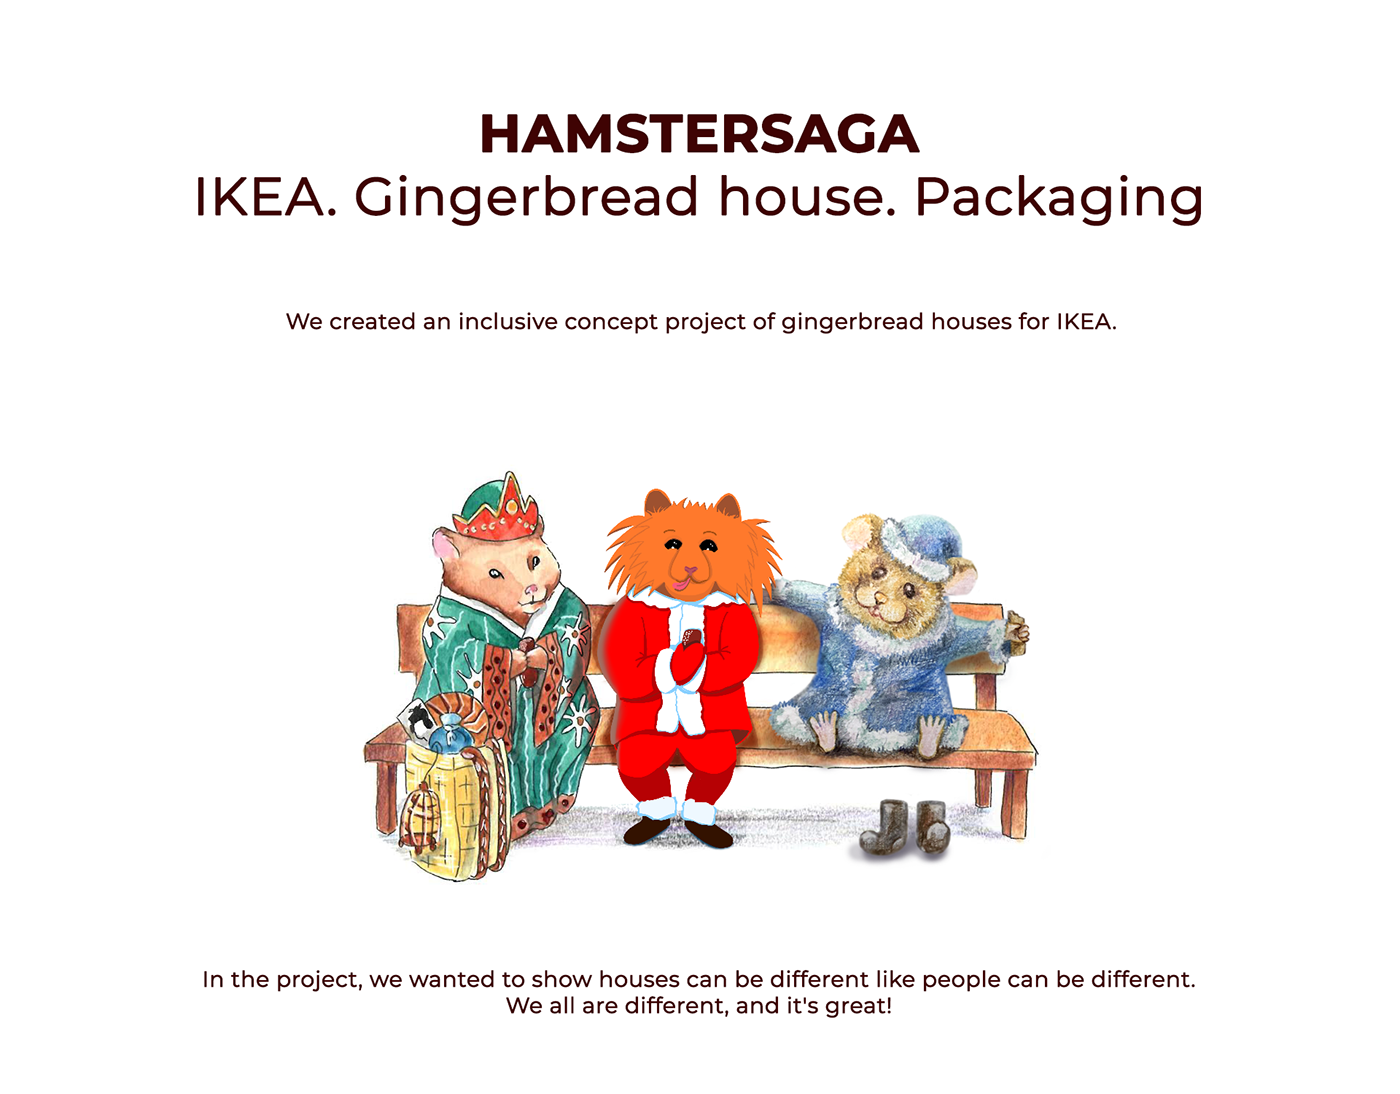 gingerbread house ikea japanese style Packaging Pencil drawing Procreate raster watercolor illustration Christmas new year